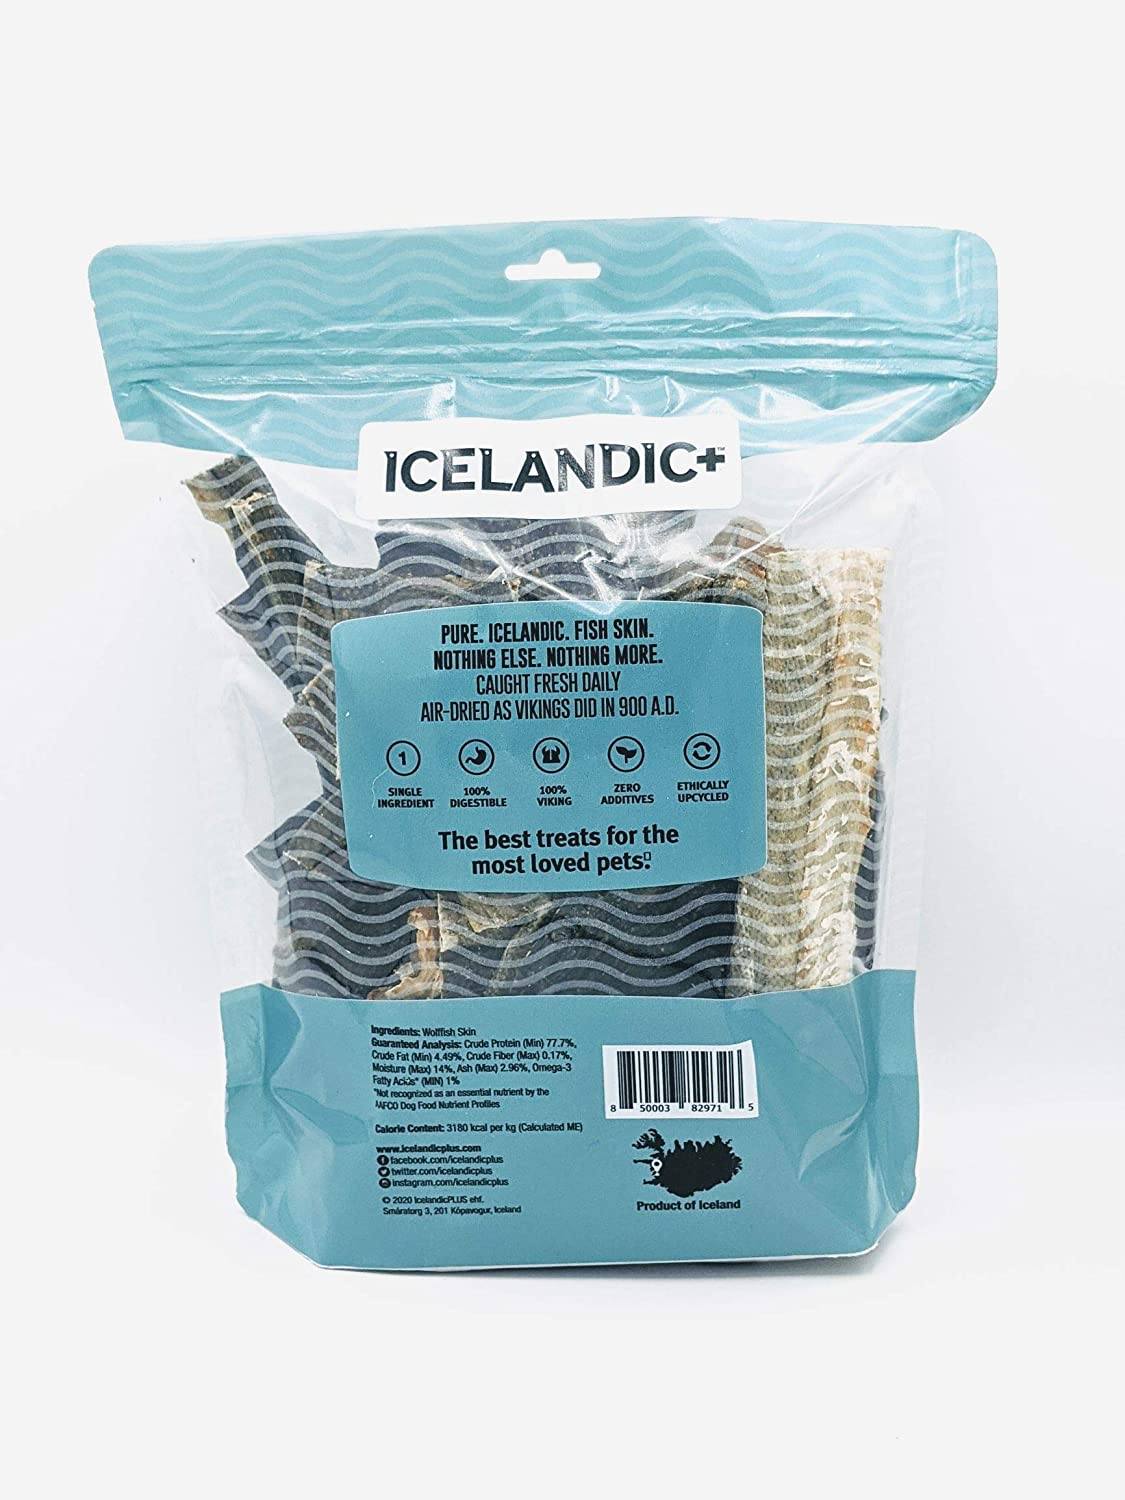 Icelandic+ Wolffish Skin Strips (Mixed Pieces) Natural Dehydrated Cat and Dog Treats - 12 oz  